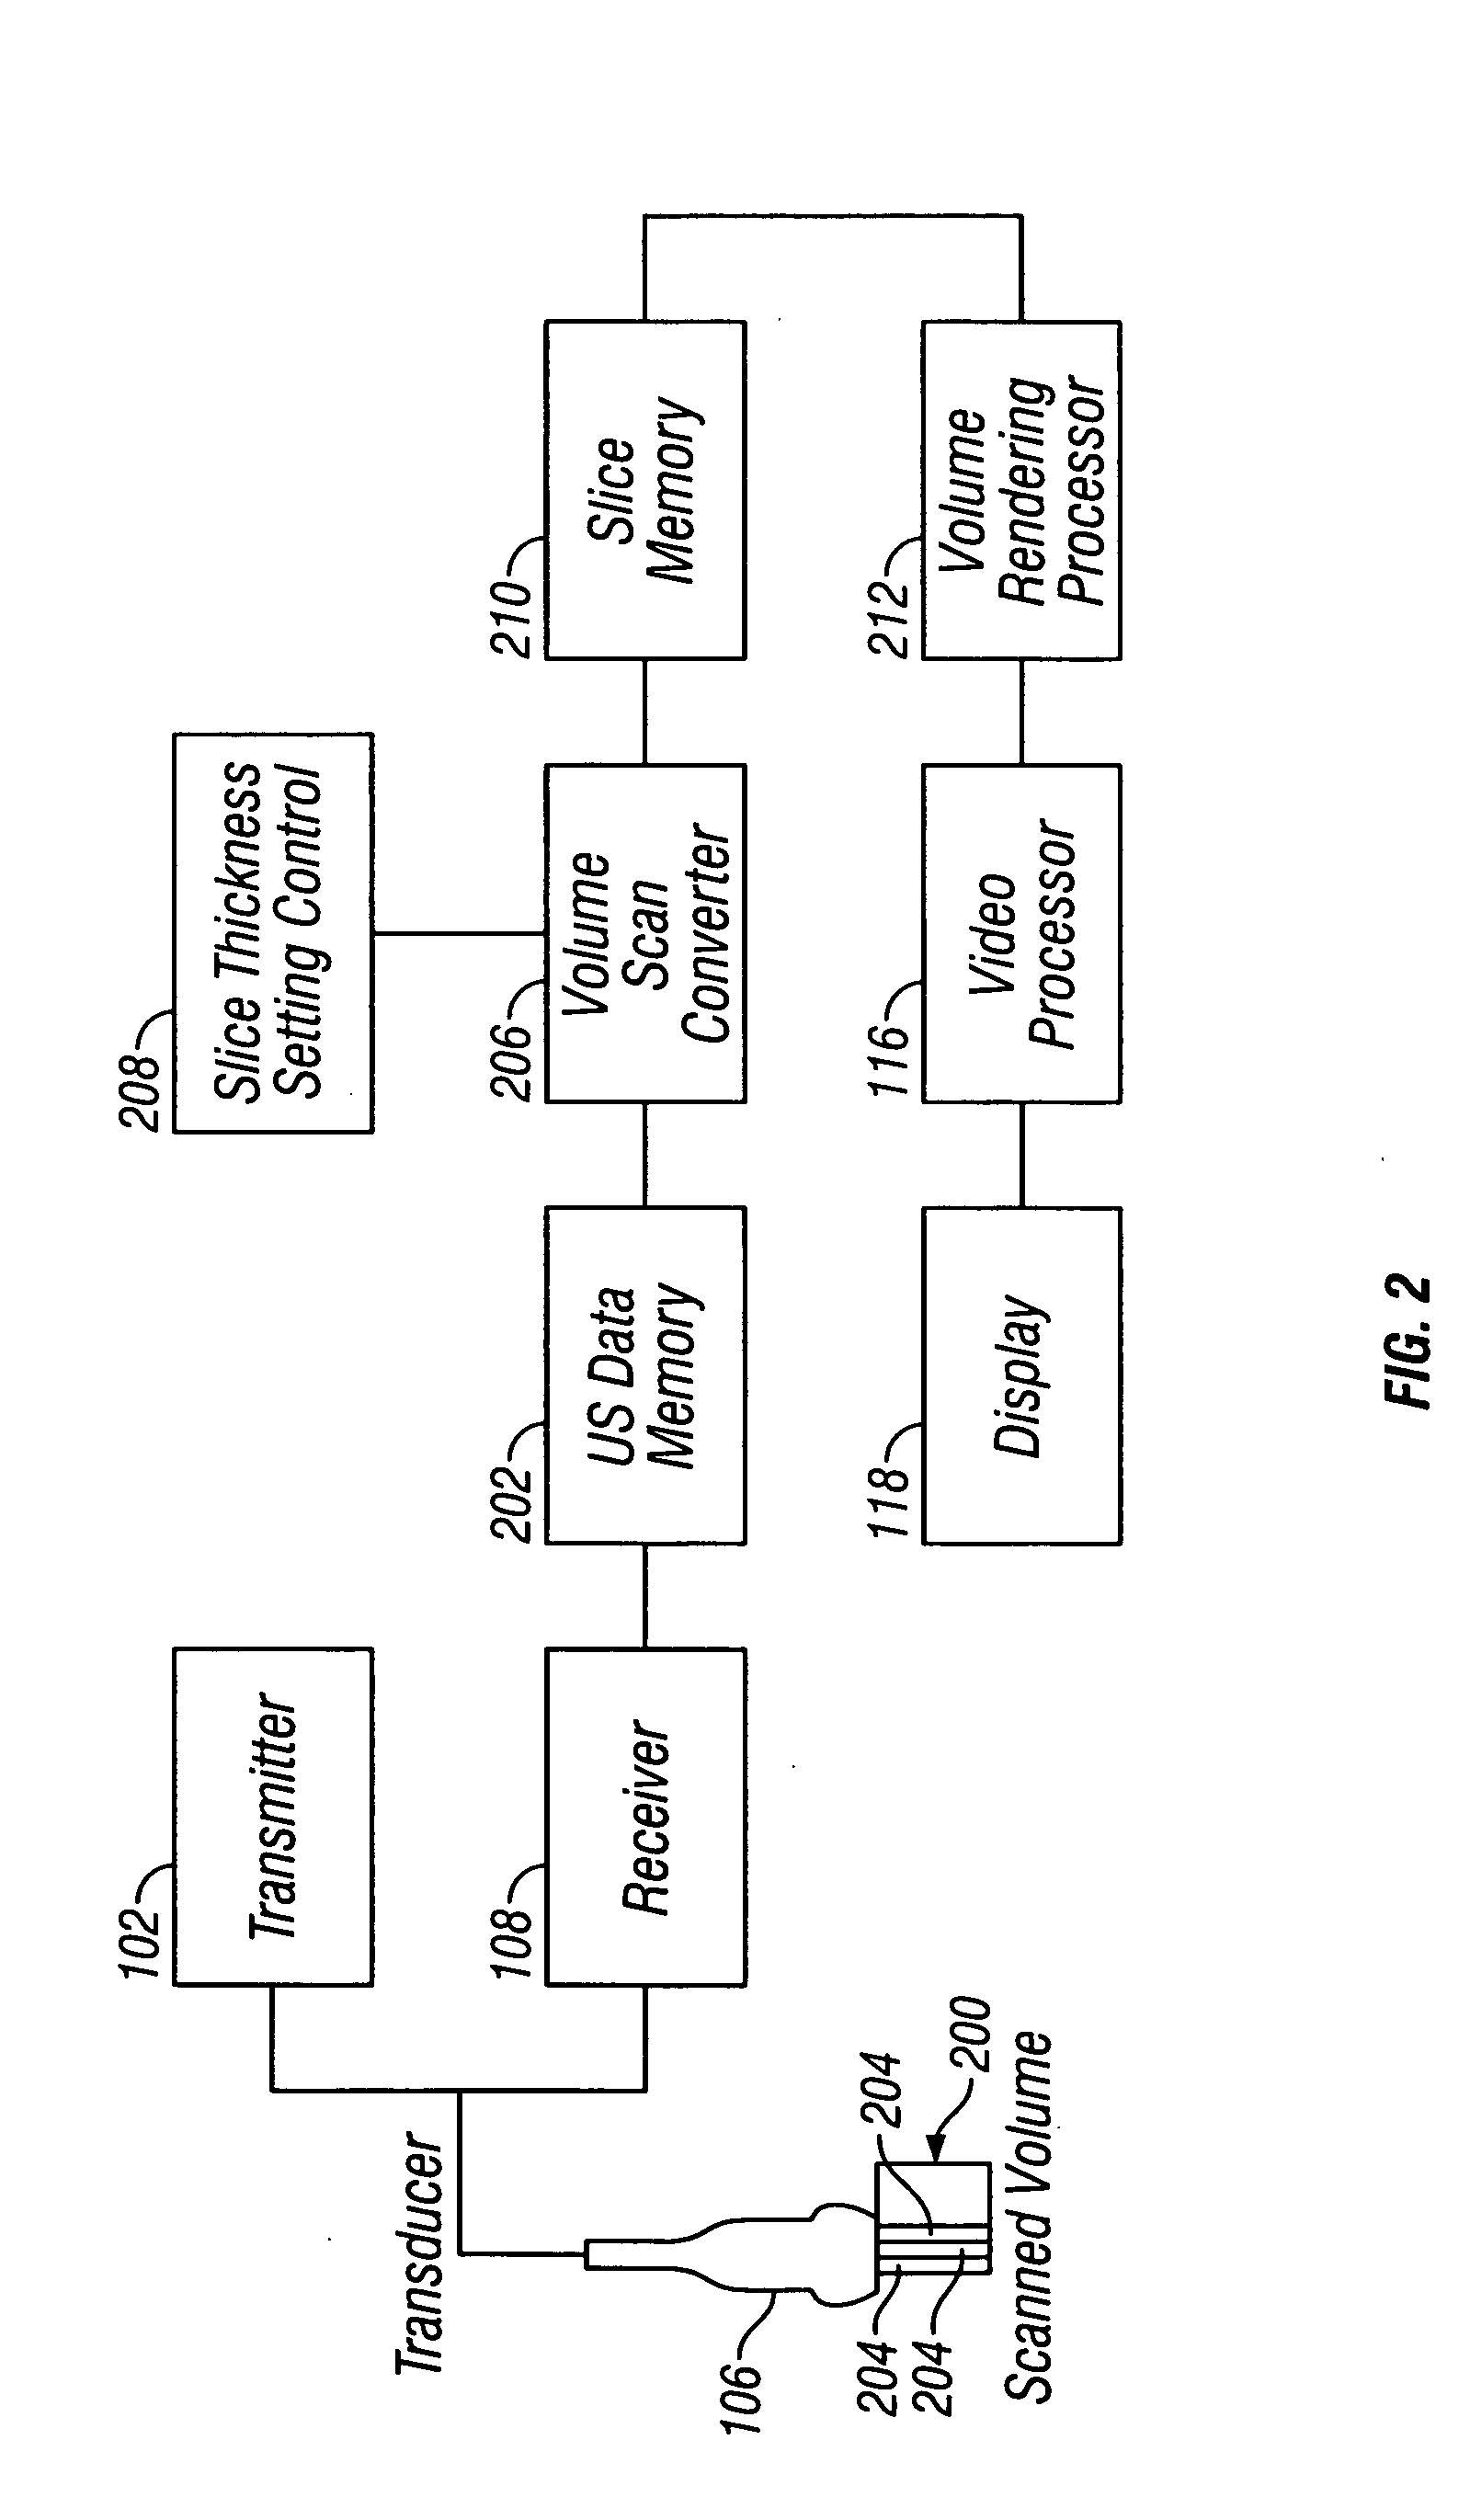 Methods and systems for angular-dependent backscatter spatial compounding